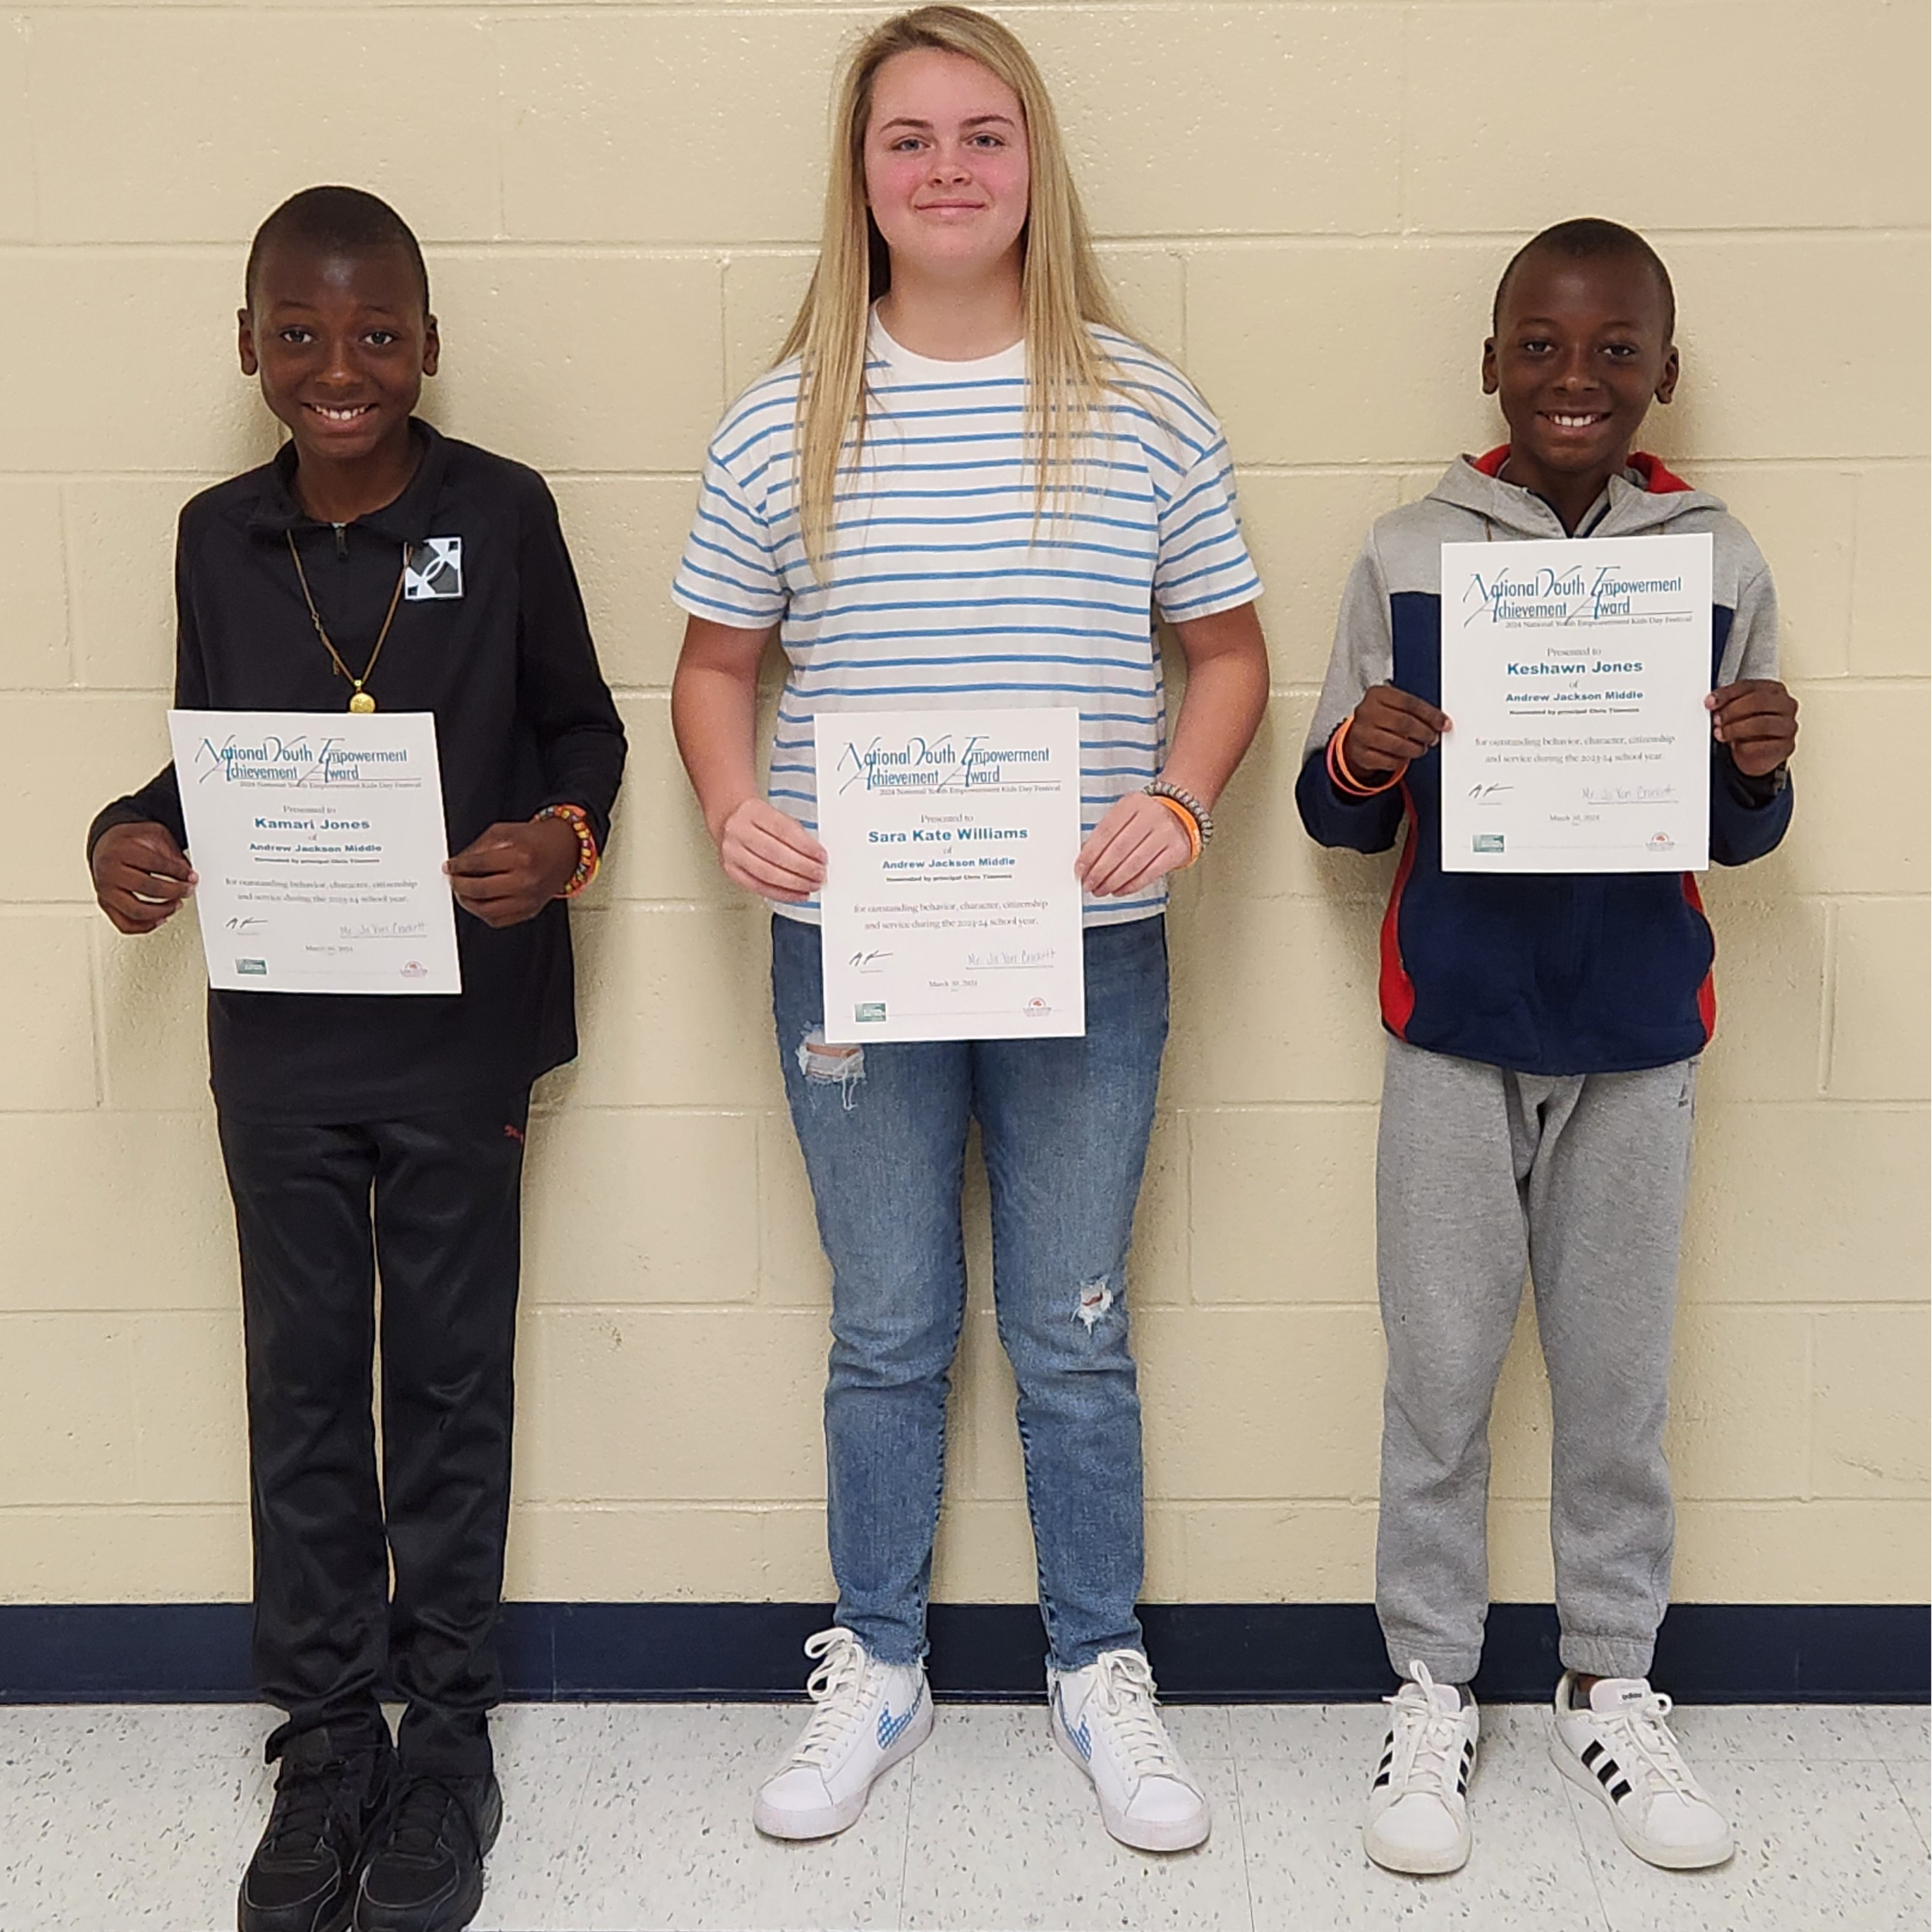 Three students holding certificates for National Youth Empowerment Achievement awards